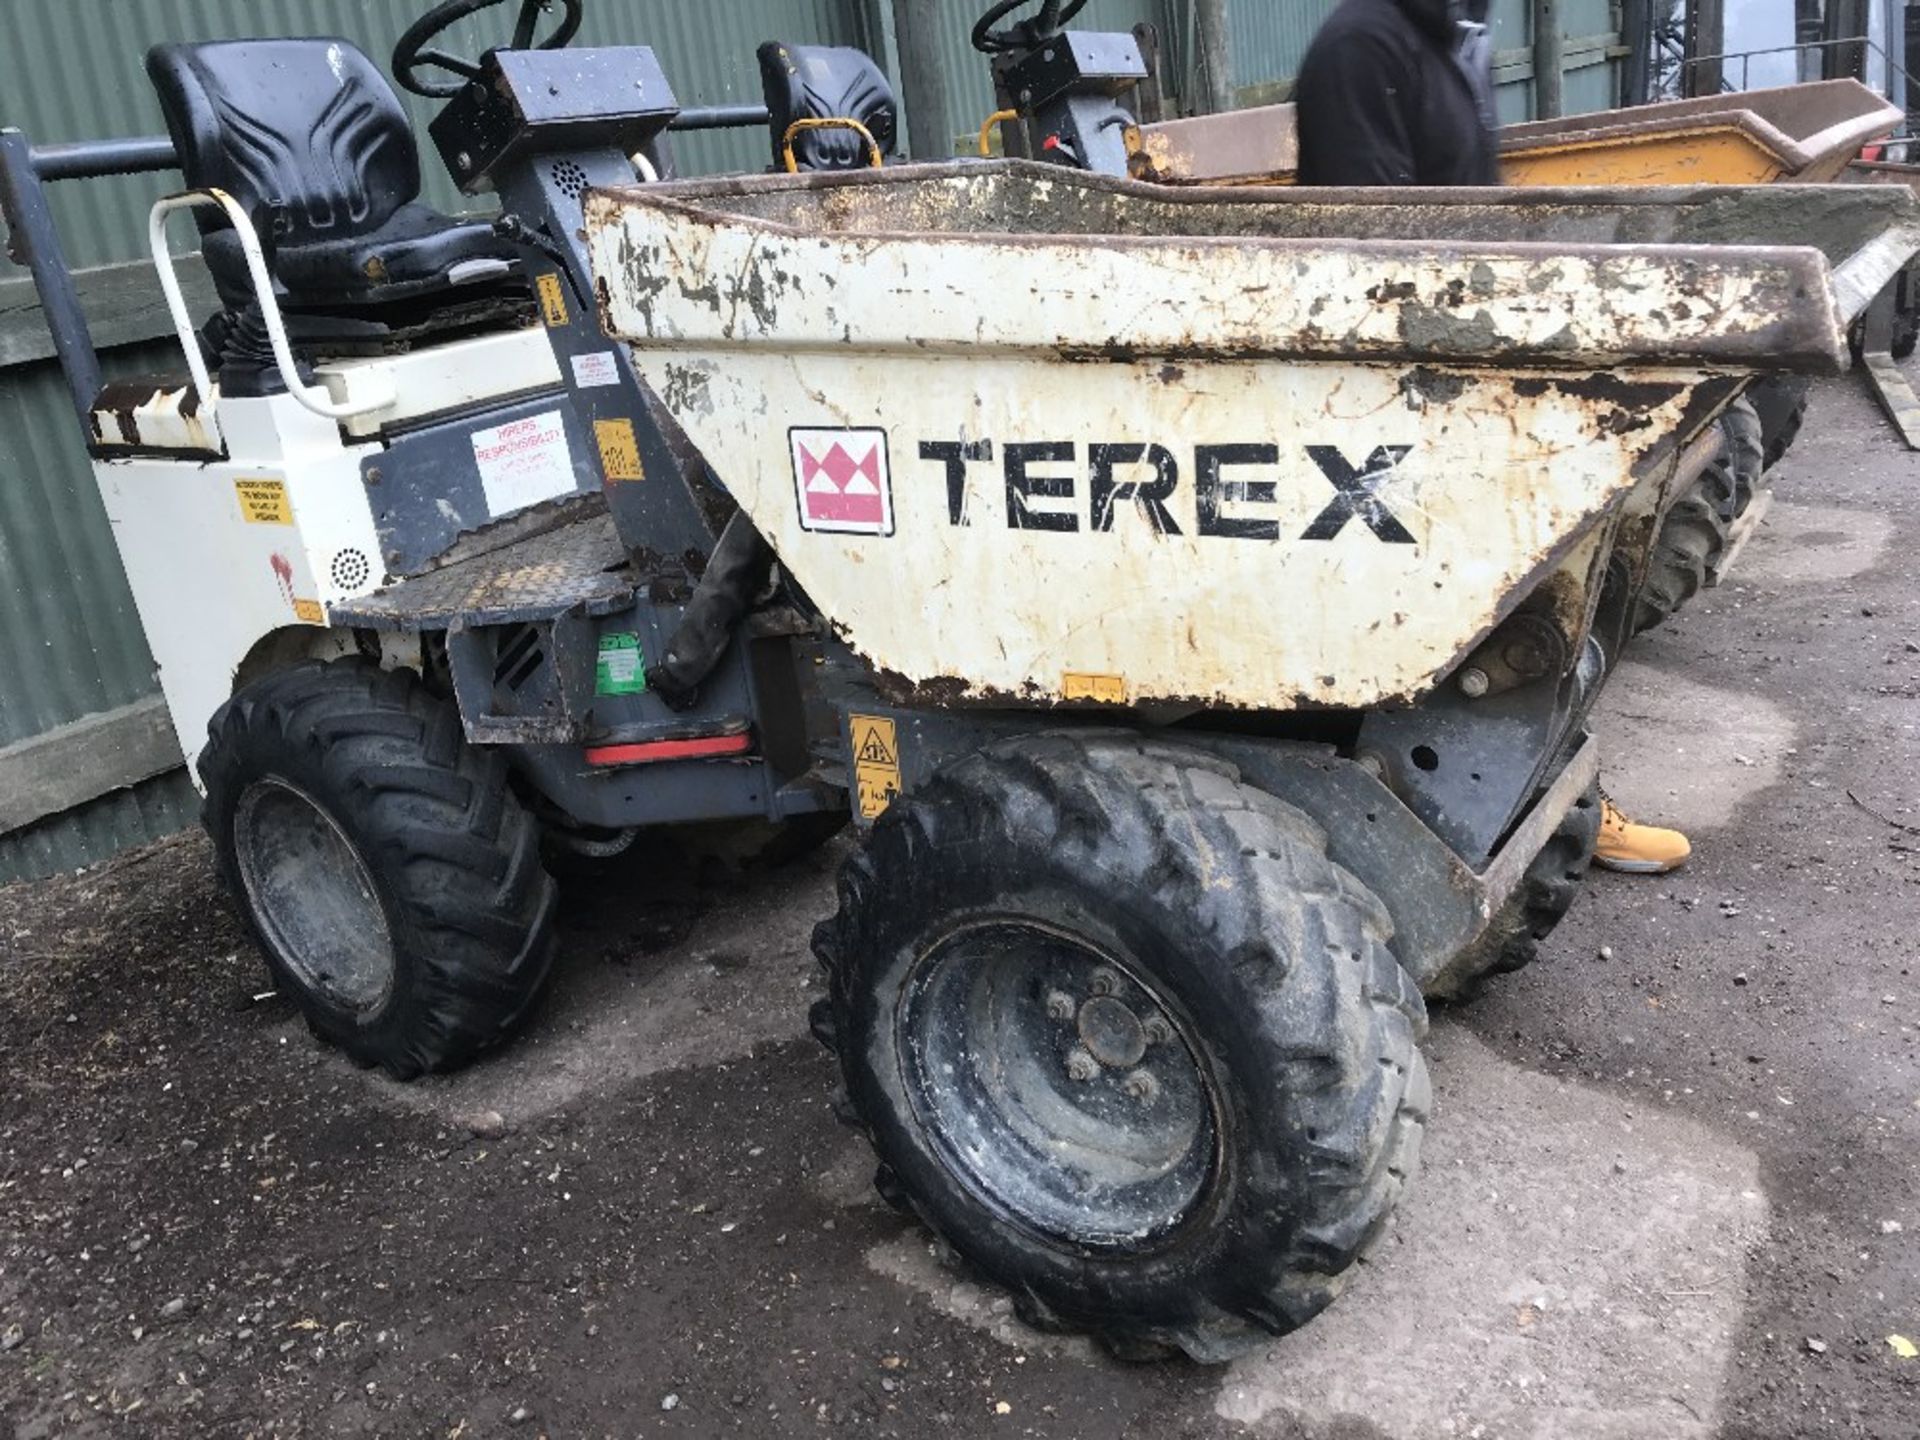 TEREX HIGH TIP DUMPER, YR2008, 2275REC.HRS, SN: SLBDRPOOE803FT275 When tested was seen to run and